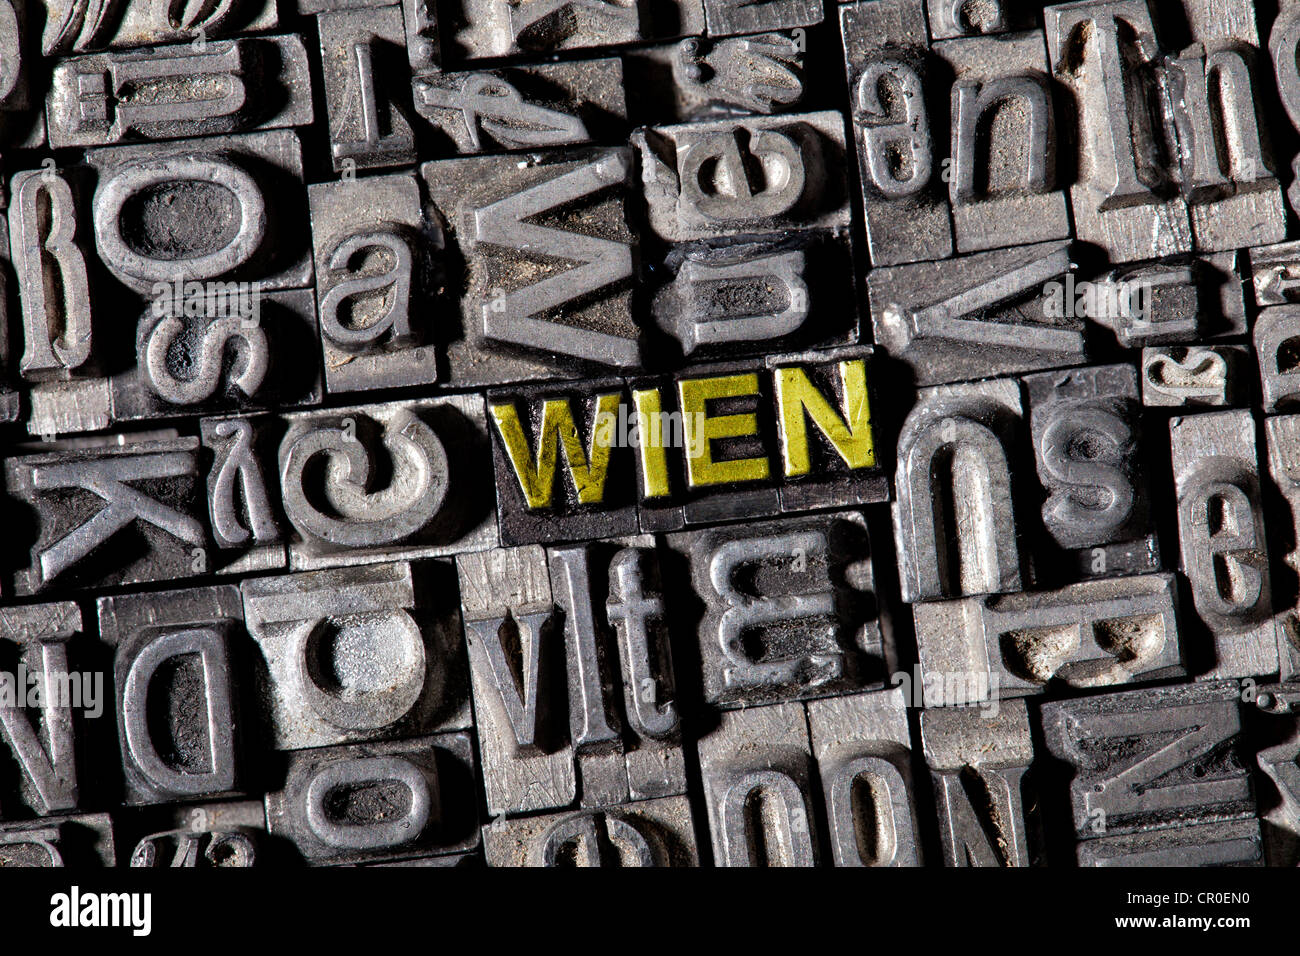 Old lead letters forming the word Wien, German for Vienna Stock Photo